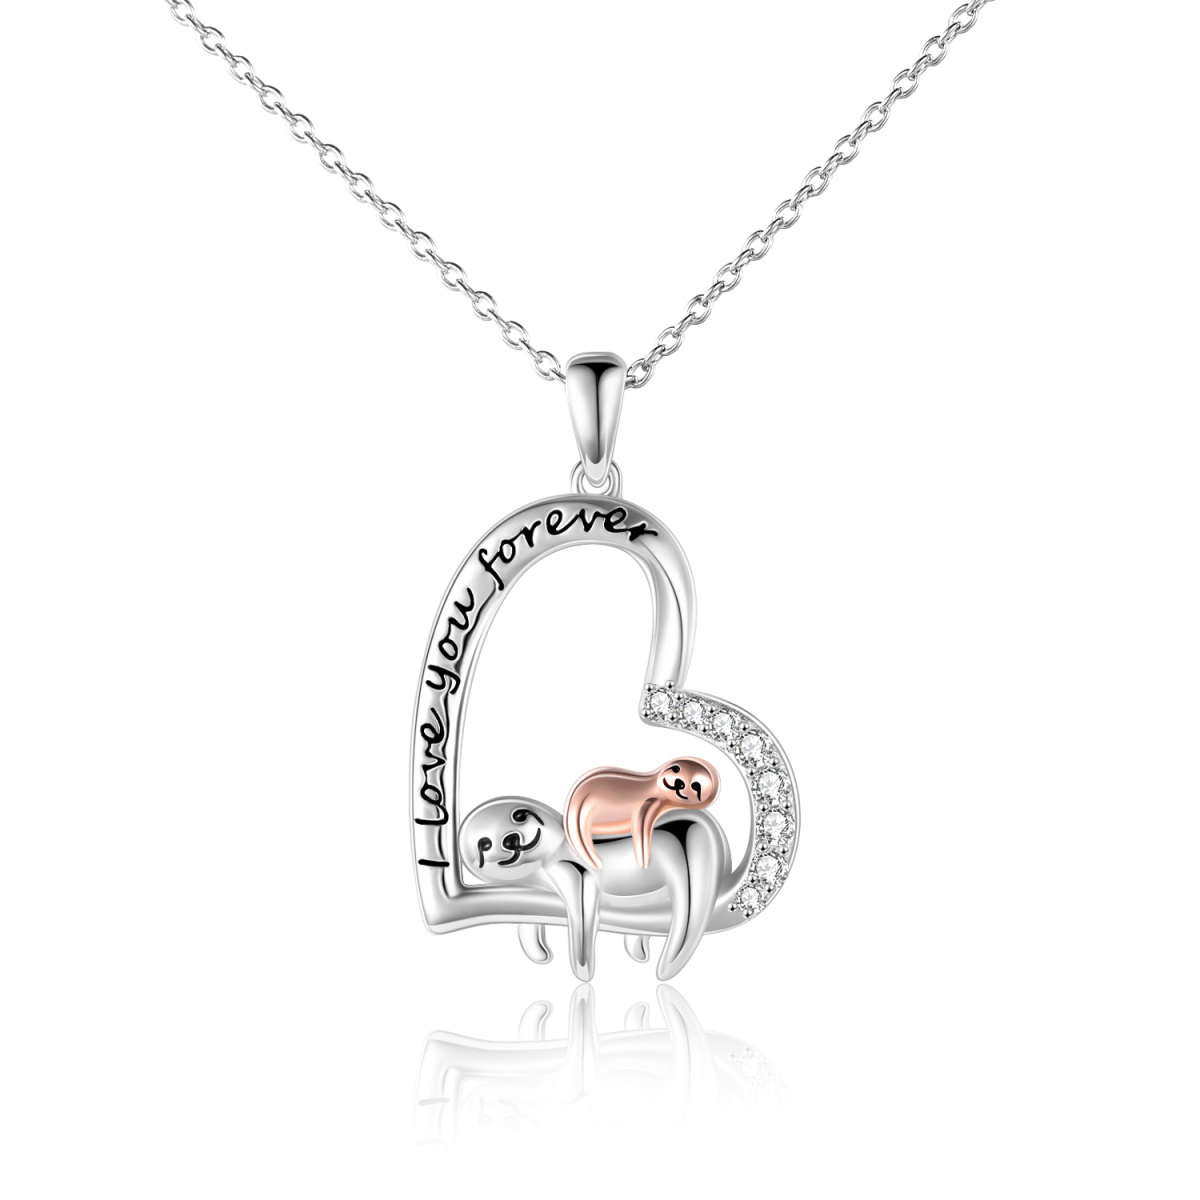 Sterling Silver Two-tone Circular Shaped Cubic Zirconia Sloth & Heart Pendant Necklace with Engraved Word-1